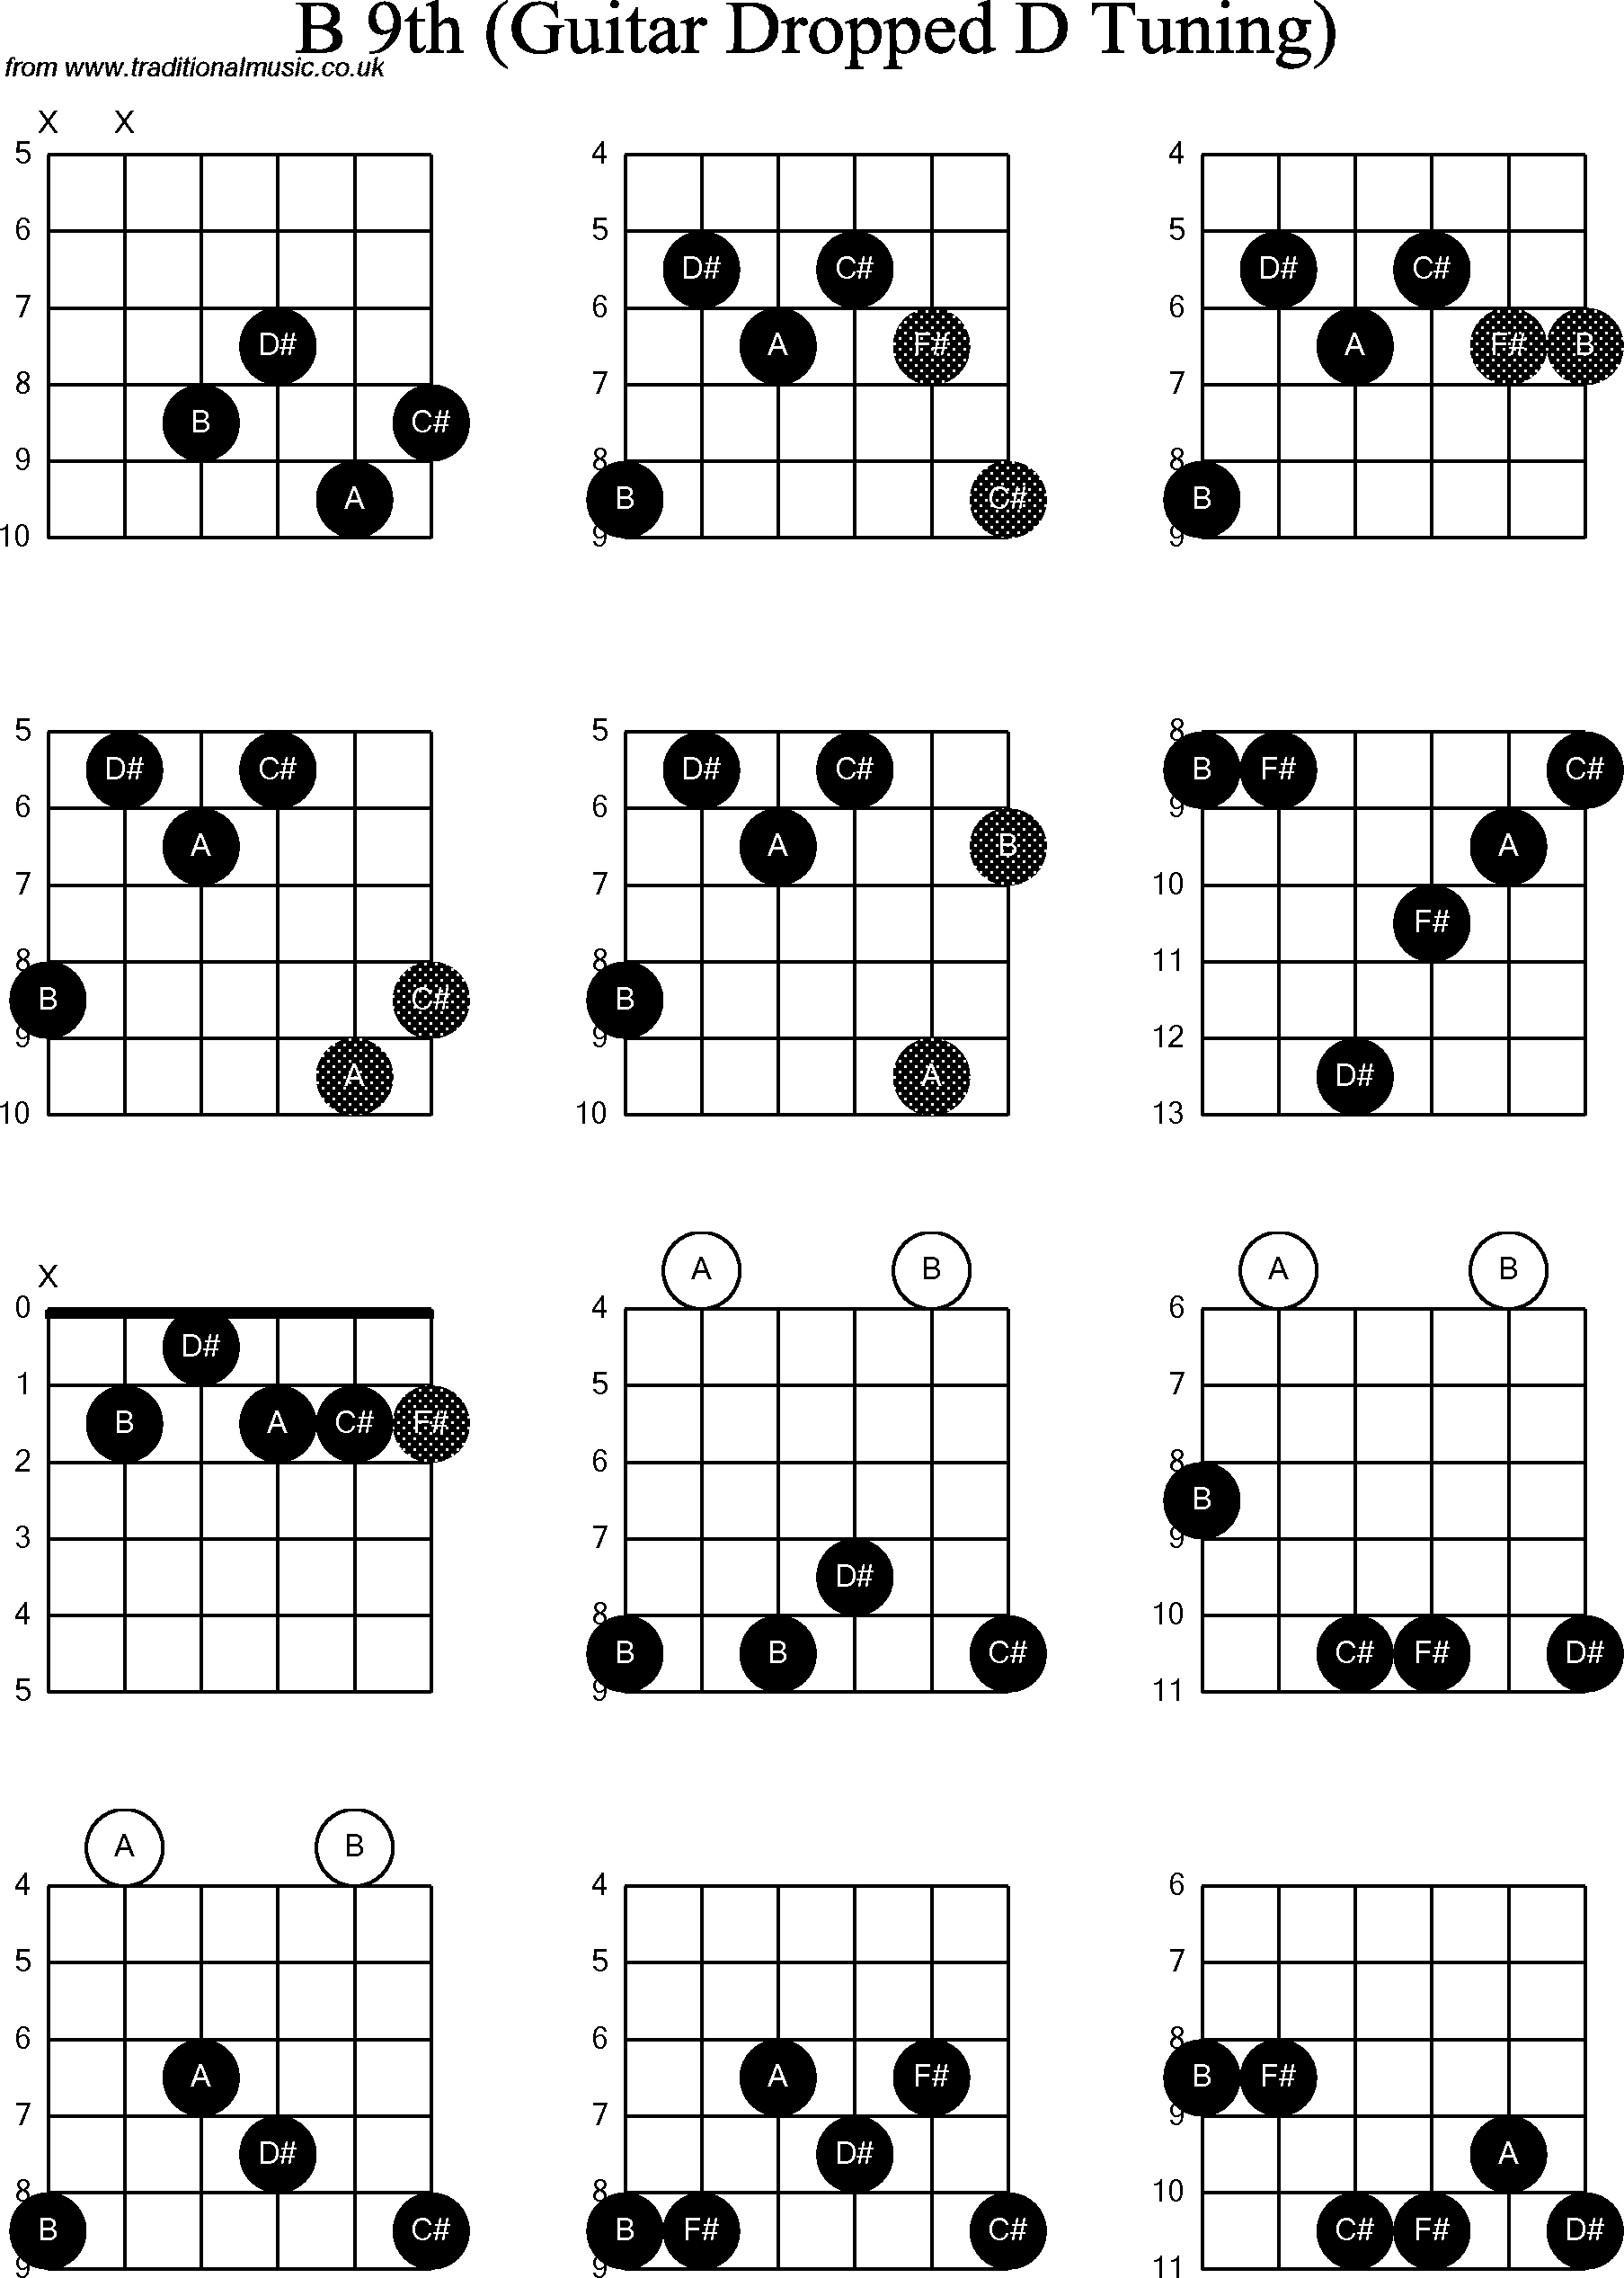 Chord diagrams for dropped D Guitar(DADGBE), B9th